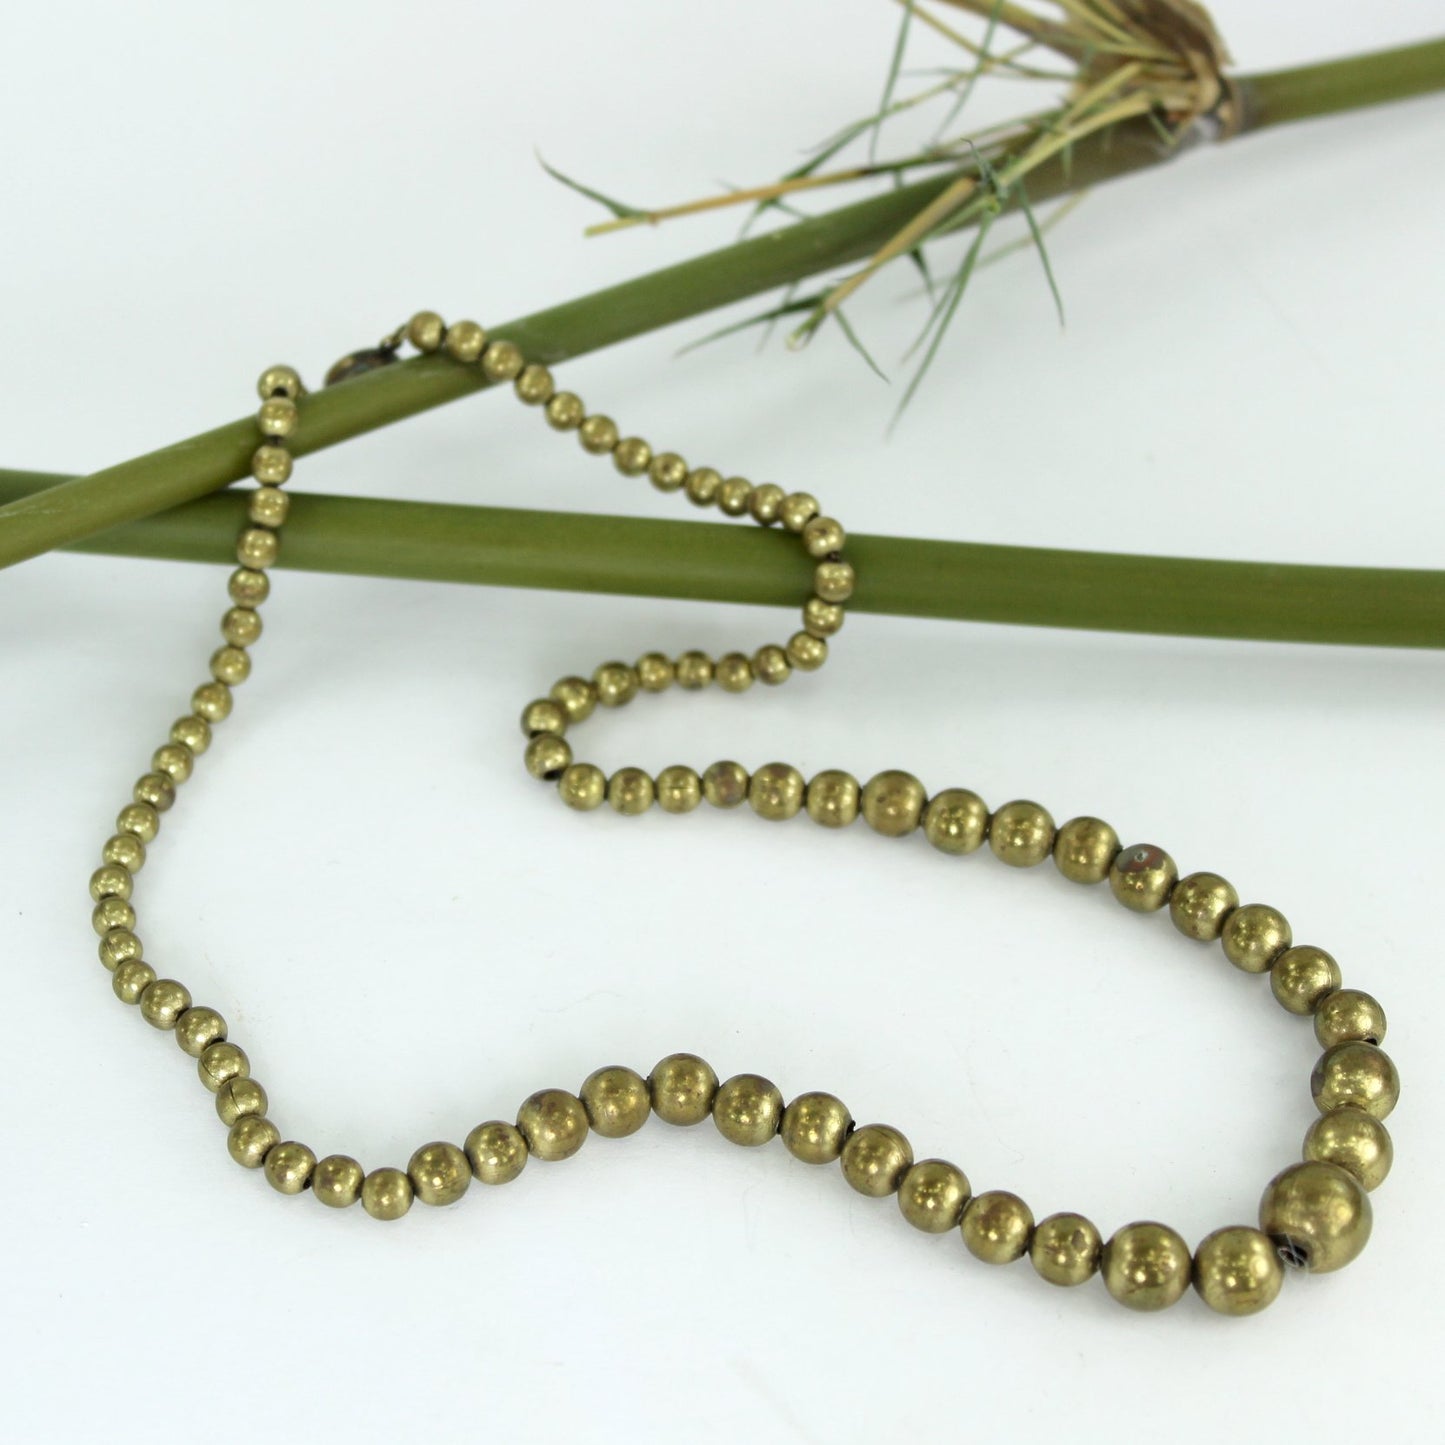 Brass Bead Necklace 1940s Graduated Size Chain Strung